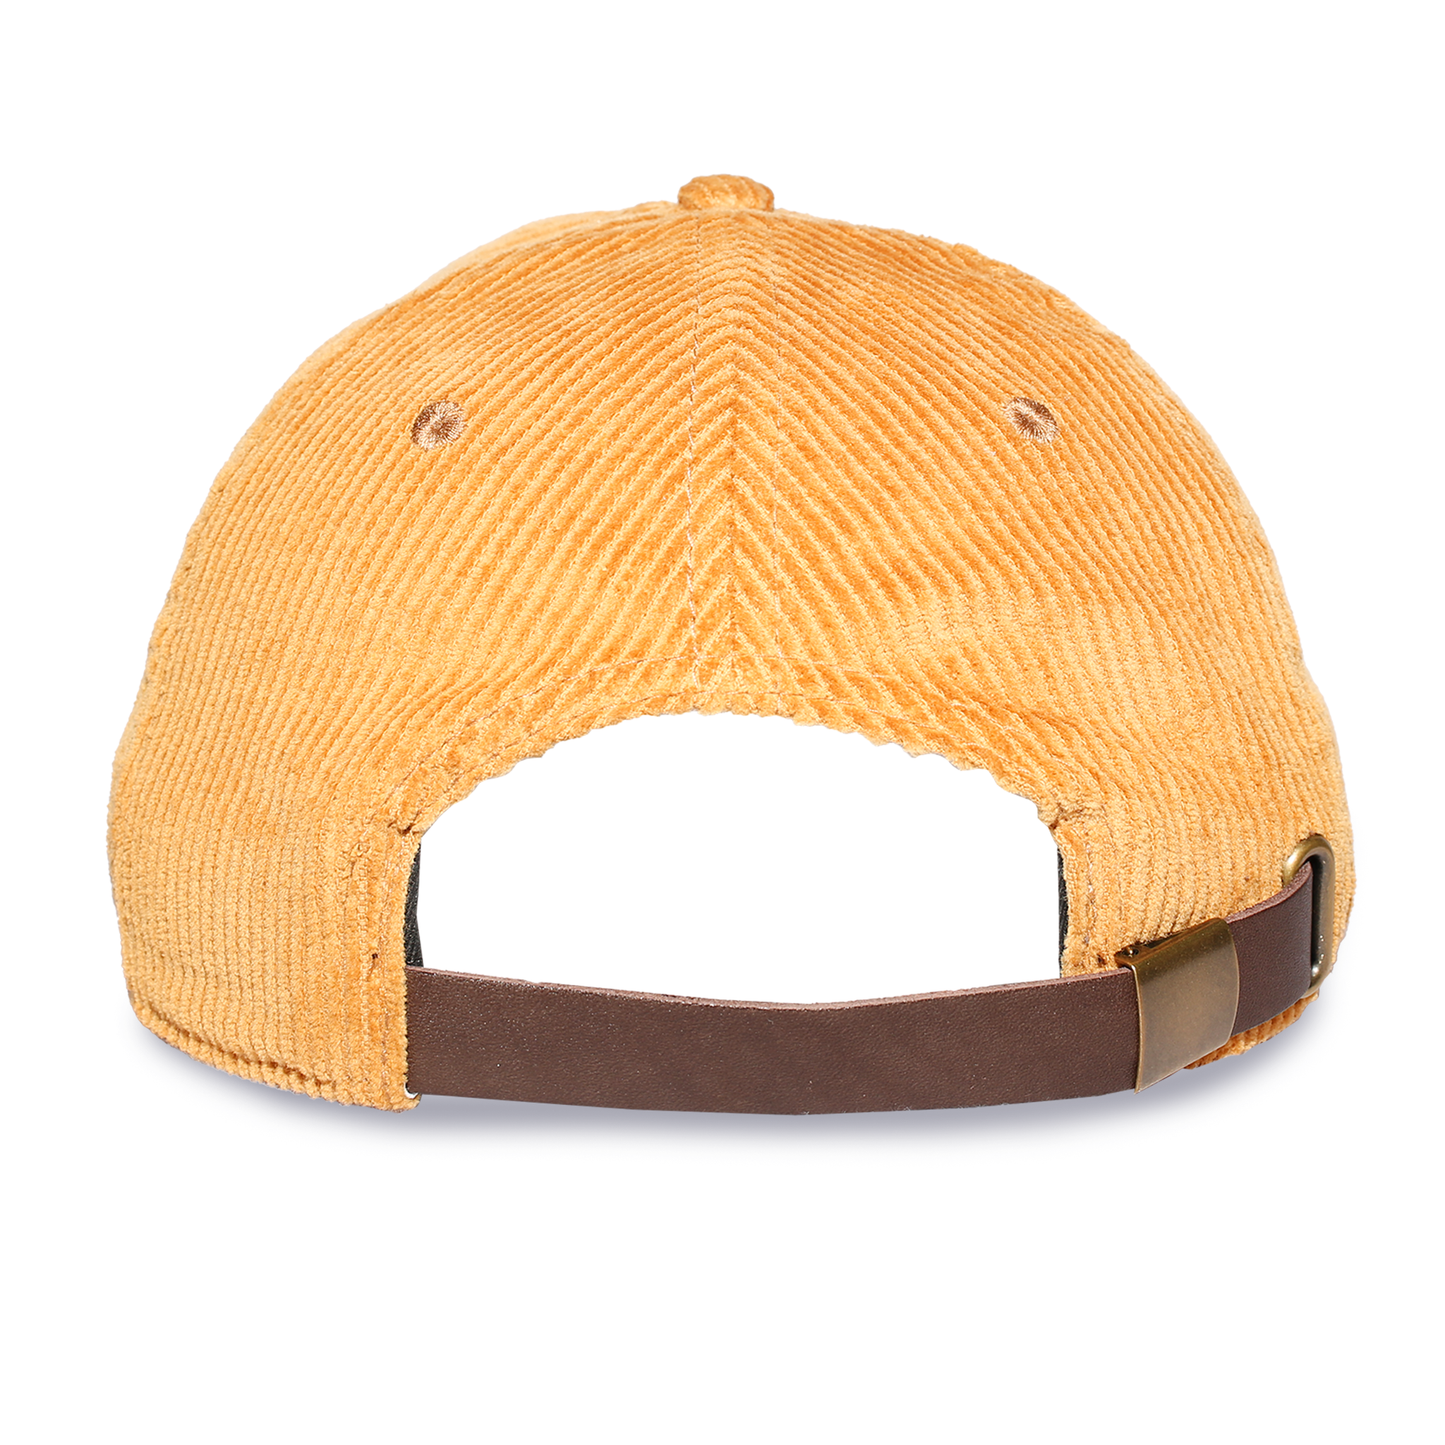 Kevin Cooley Hat